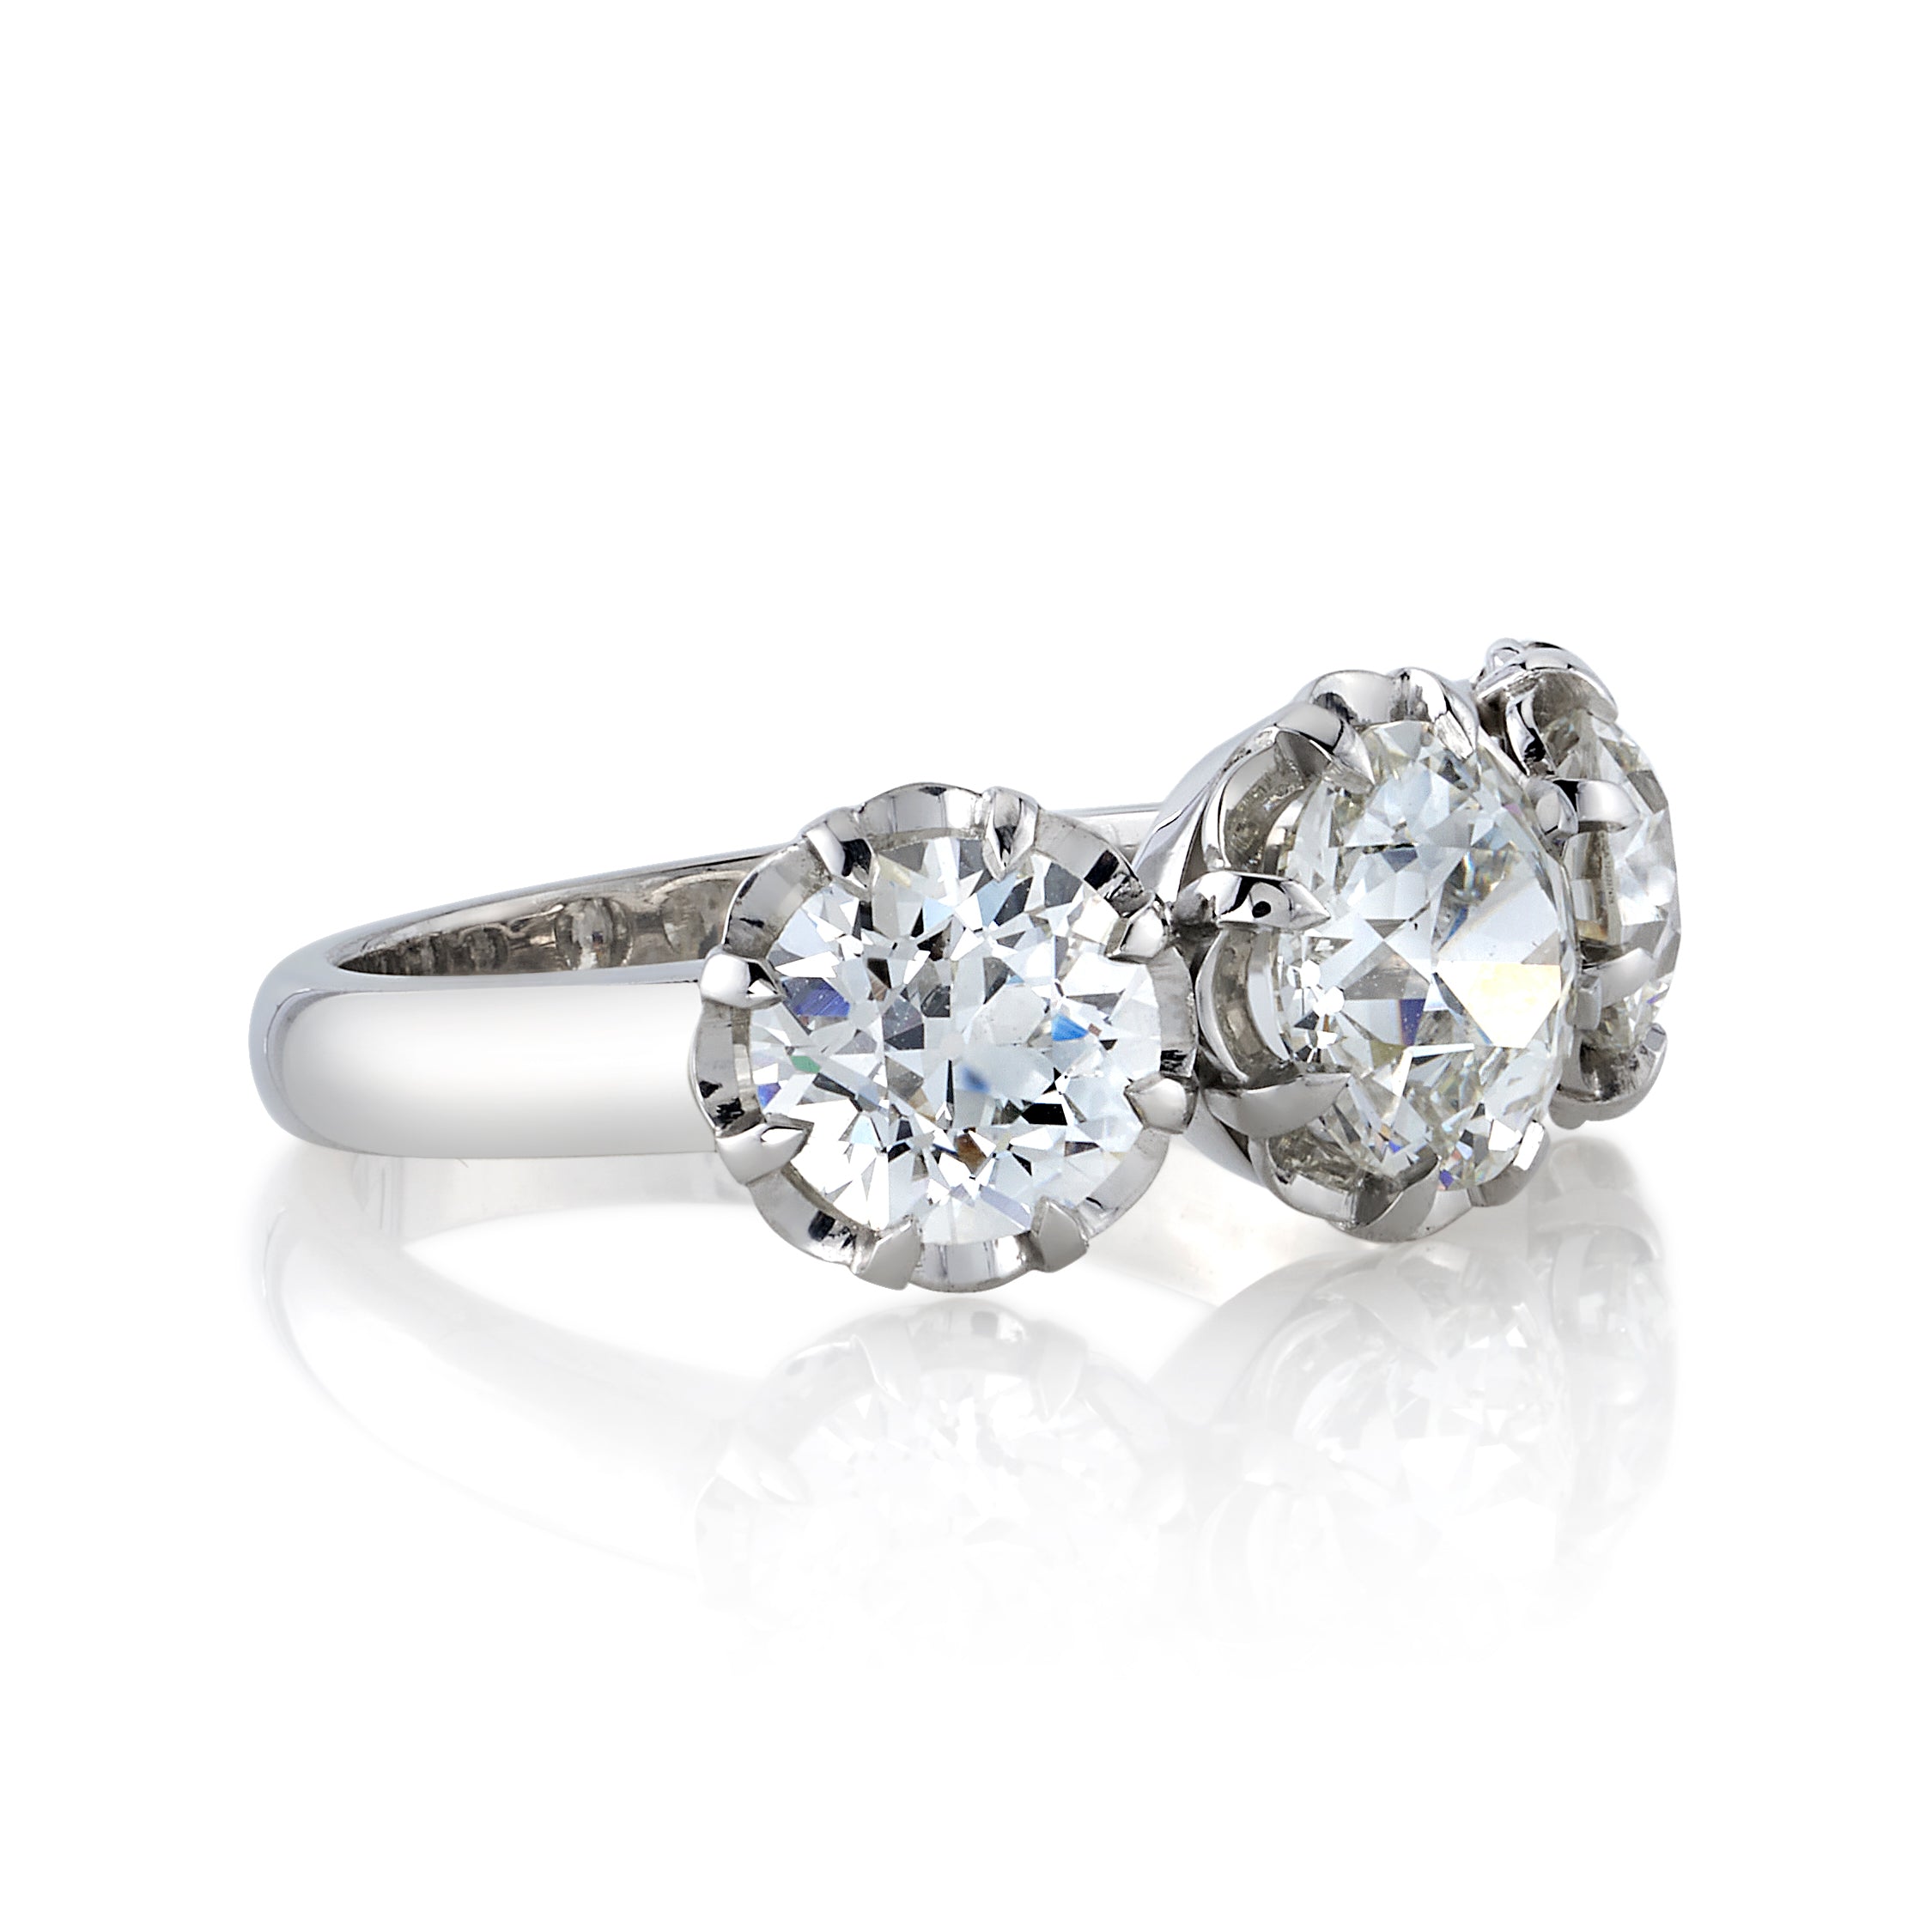 SINGLE STONE THREE STONE JOLENE RING featuring 3.36ctw I-J/VS1-VS2 GIA certified old European cut diamonds set in a handcrafted platinum mounting.